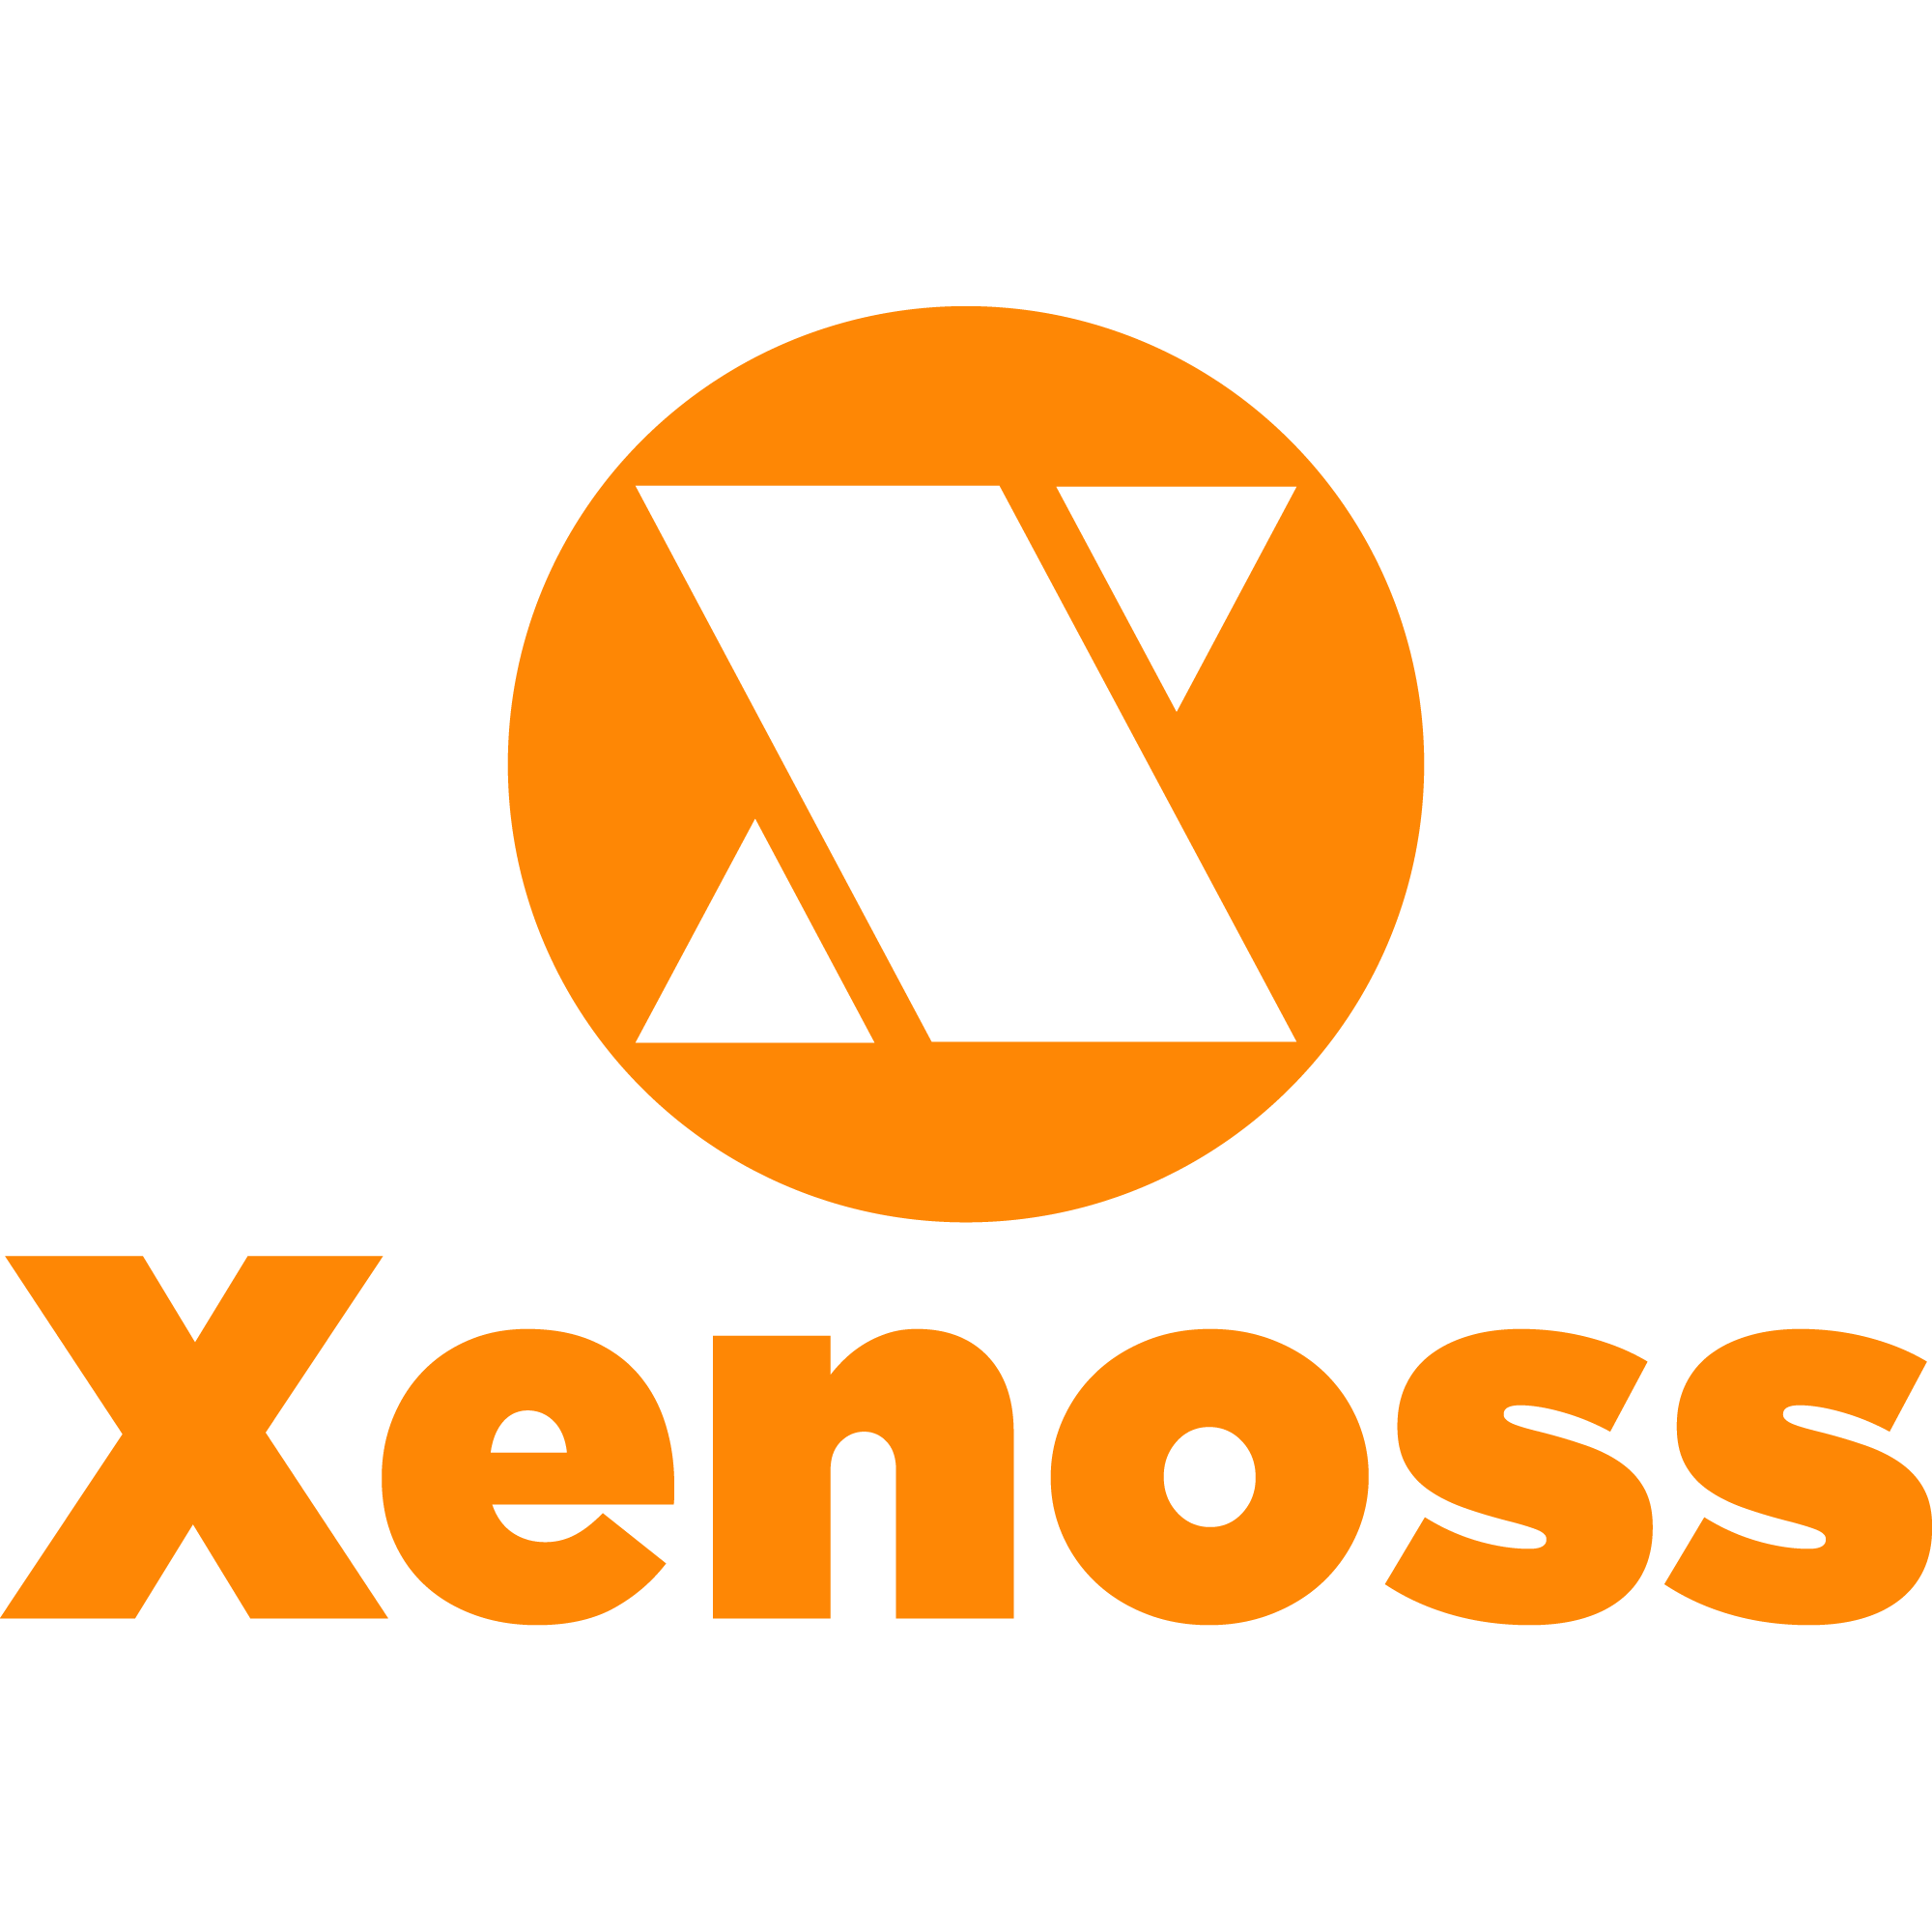 Xenoss profile on Qualified.One